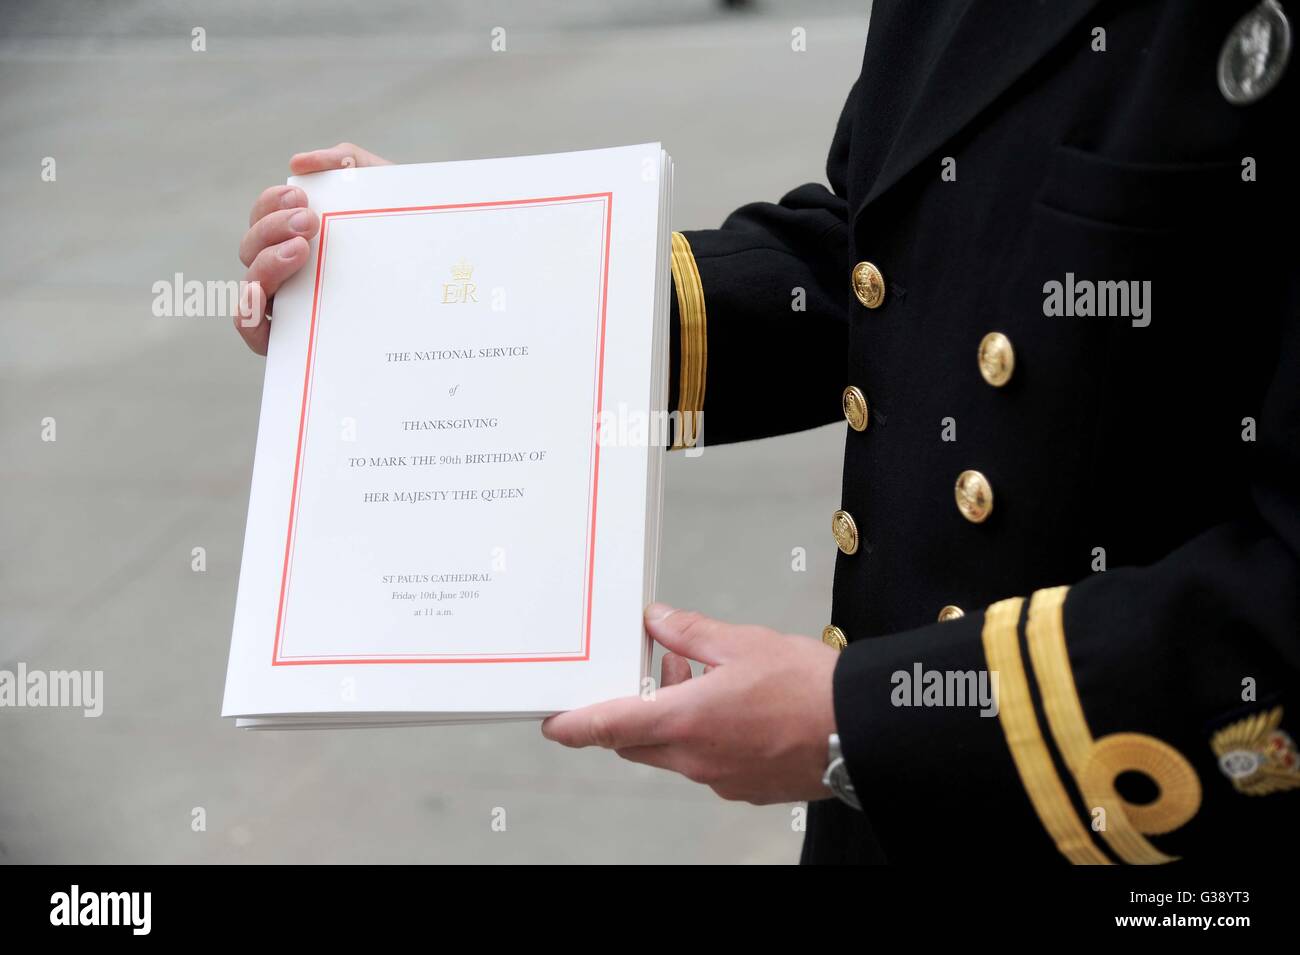 National Service of Thanksgiving to mark Queen Elizabeth II's 90th Birthday: Order of Service for Thanksgiving Service Stock Photo